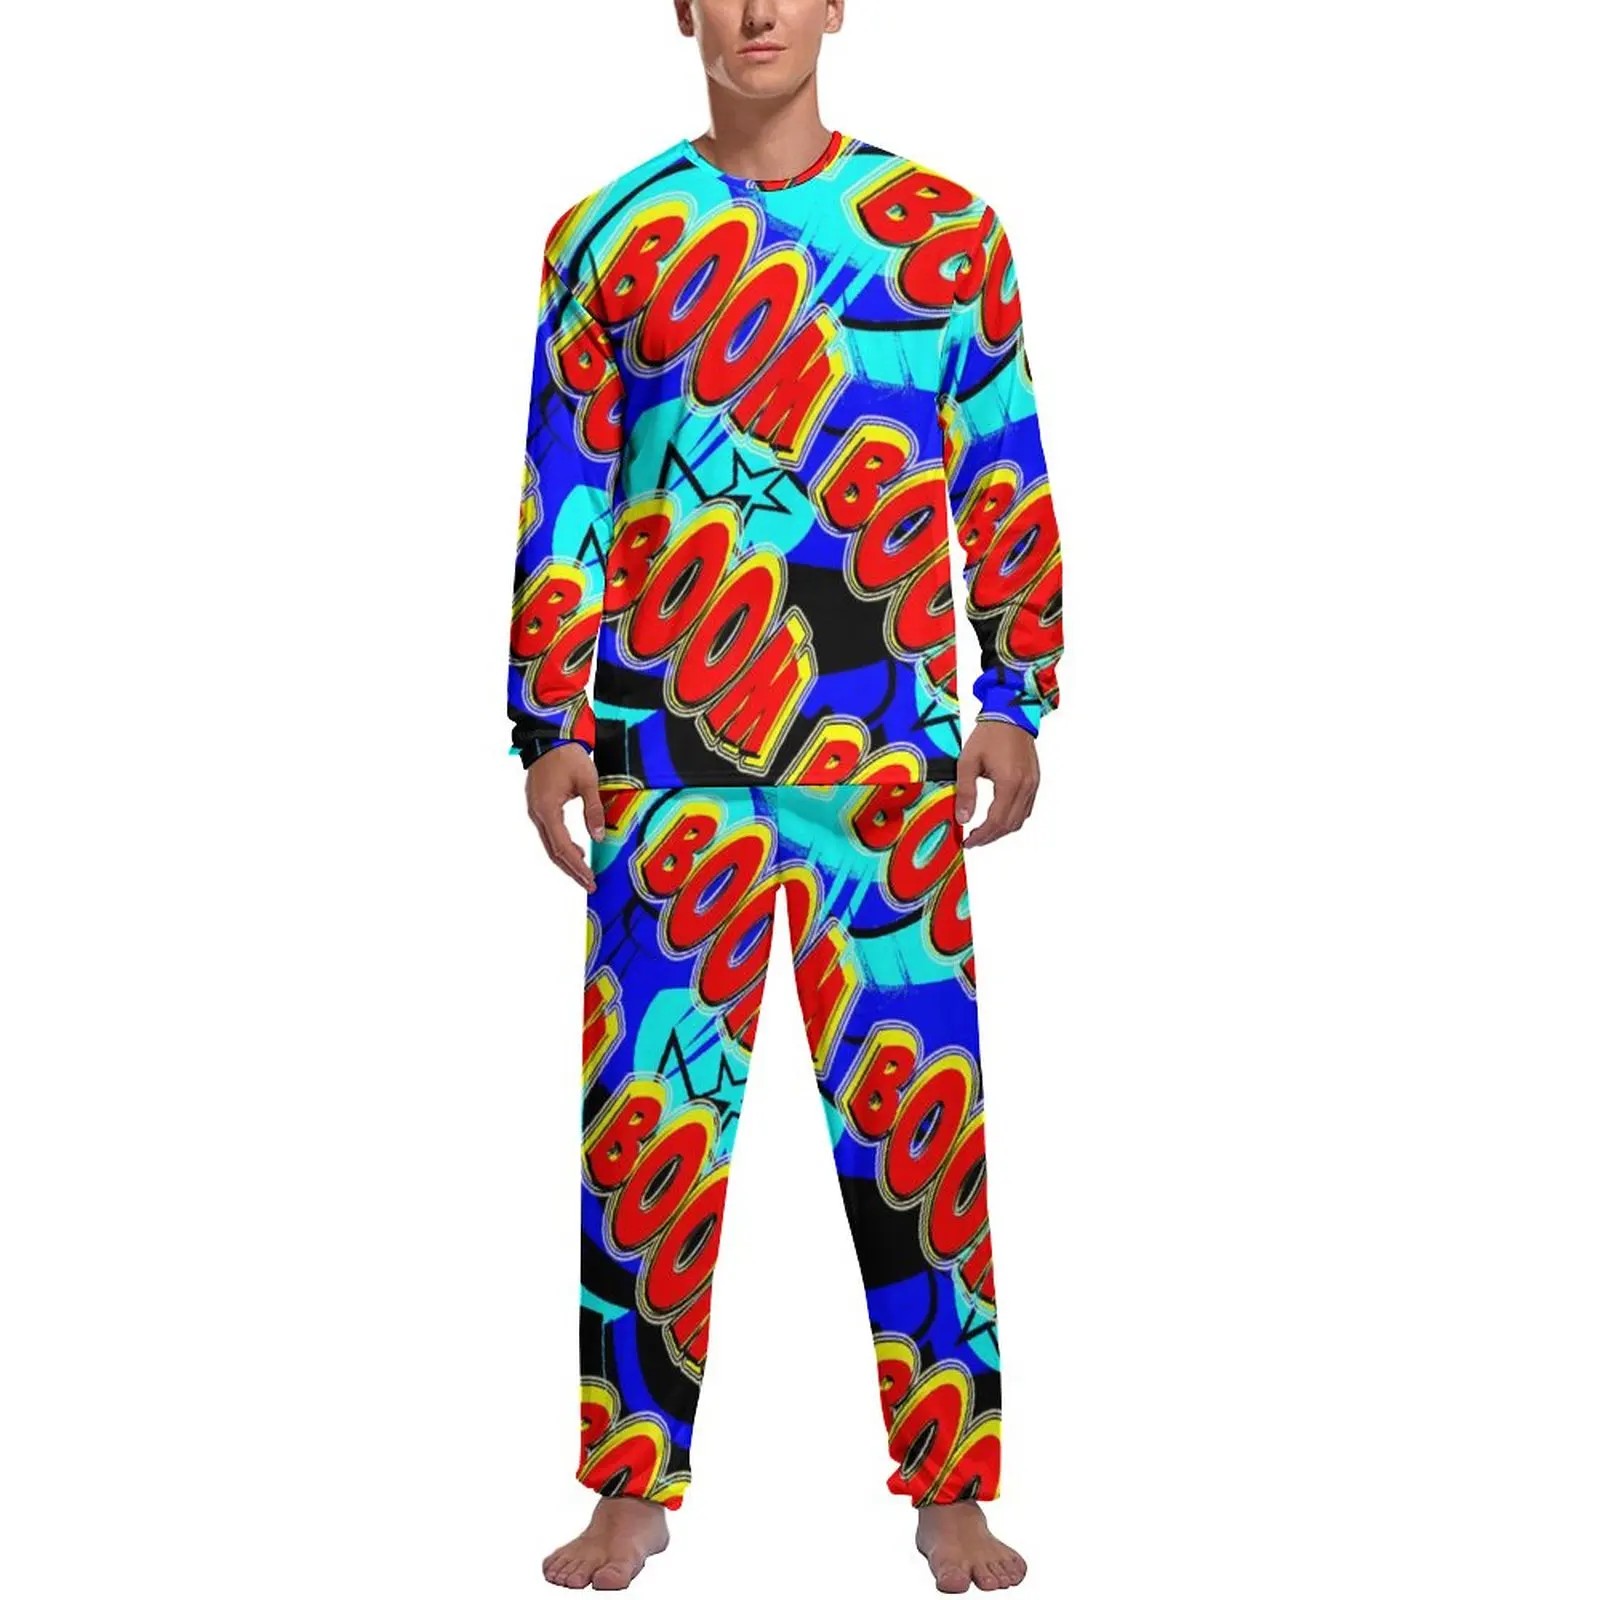 Boom Letter Print Pajamas Long Sleeve Pop Art 2 Piece Casual Pajama Sets Autumn Male Graphic Lovely Nightwear